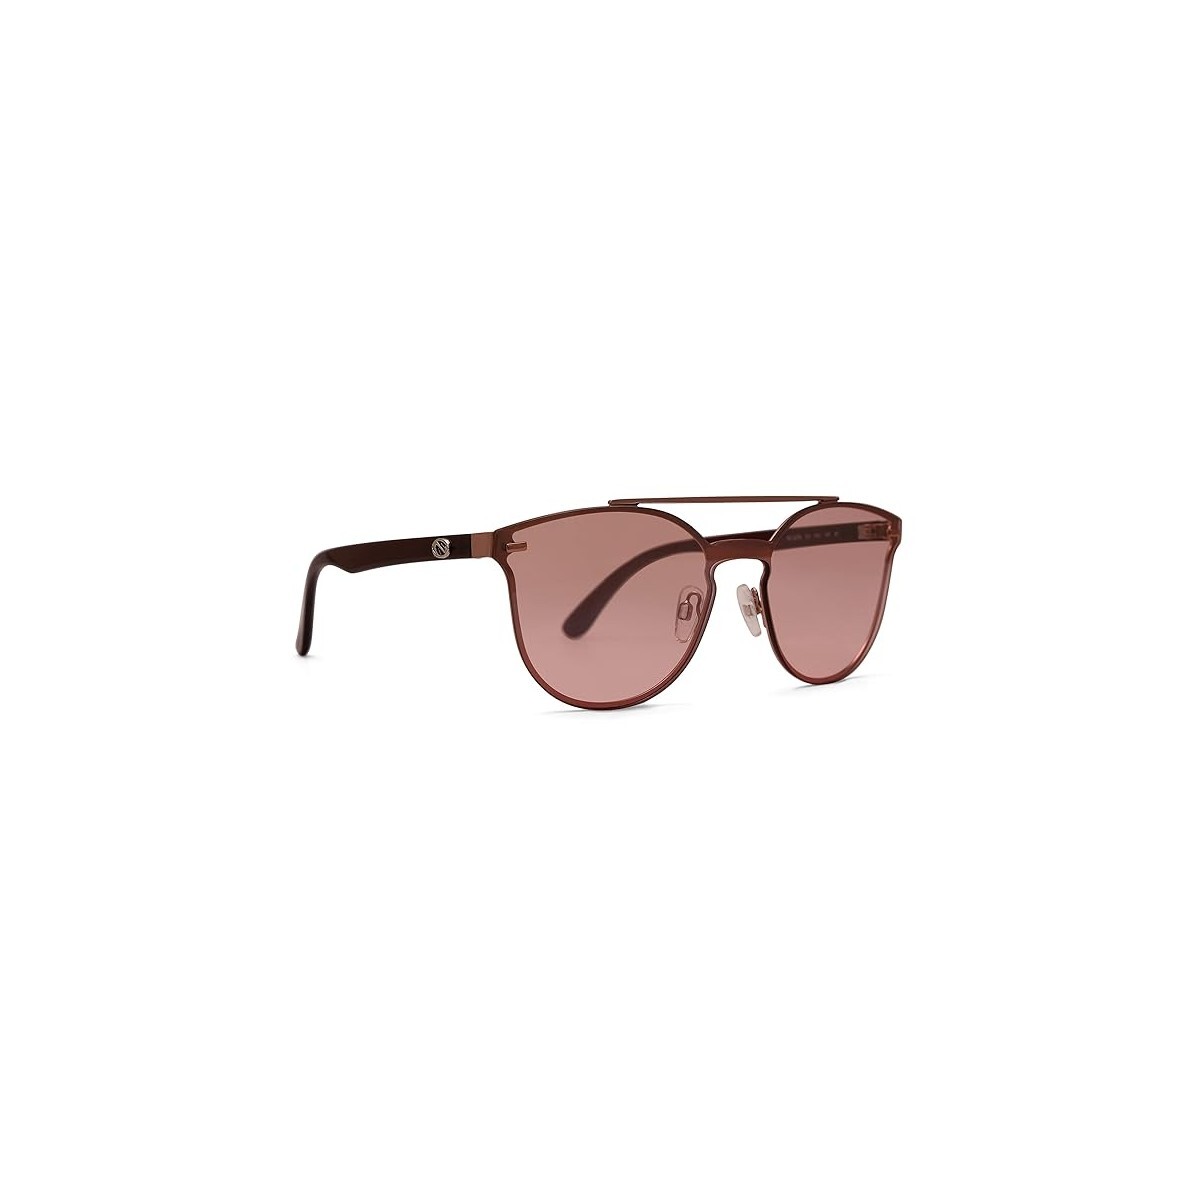 Scott Female Brown With Brown Lens Sunglass